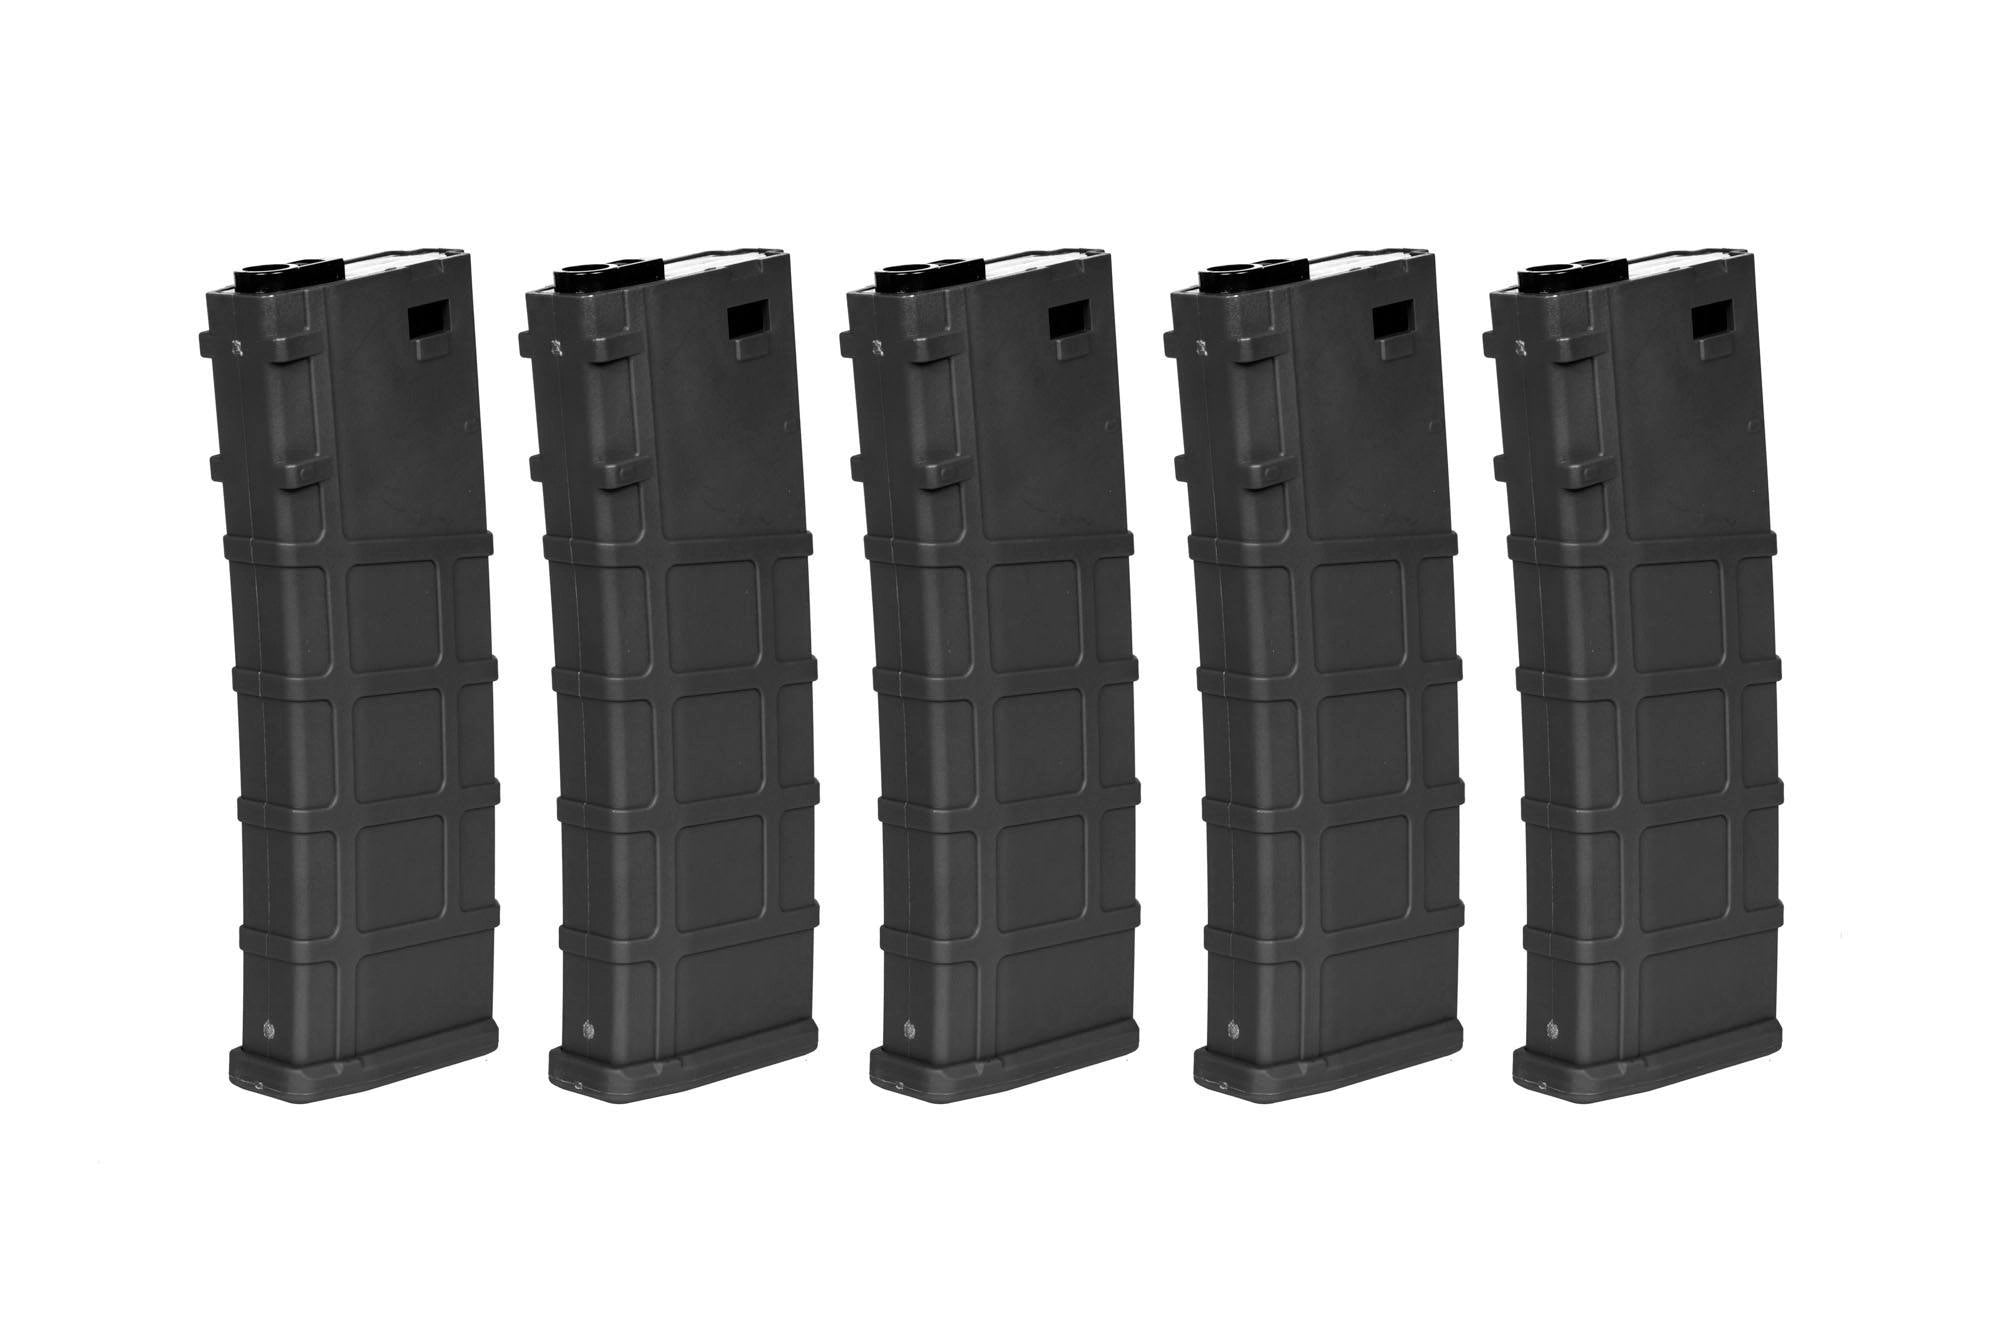 Set of 5 Polymer 200 BB's Mid-Cap magazines for M4/M16 replicas - Black-2